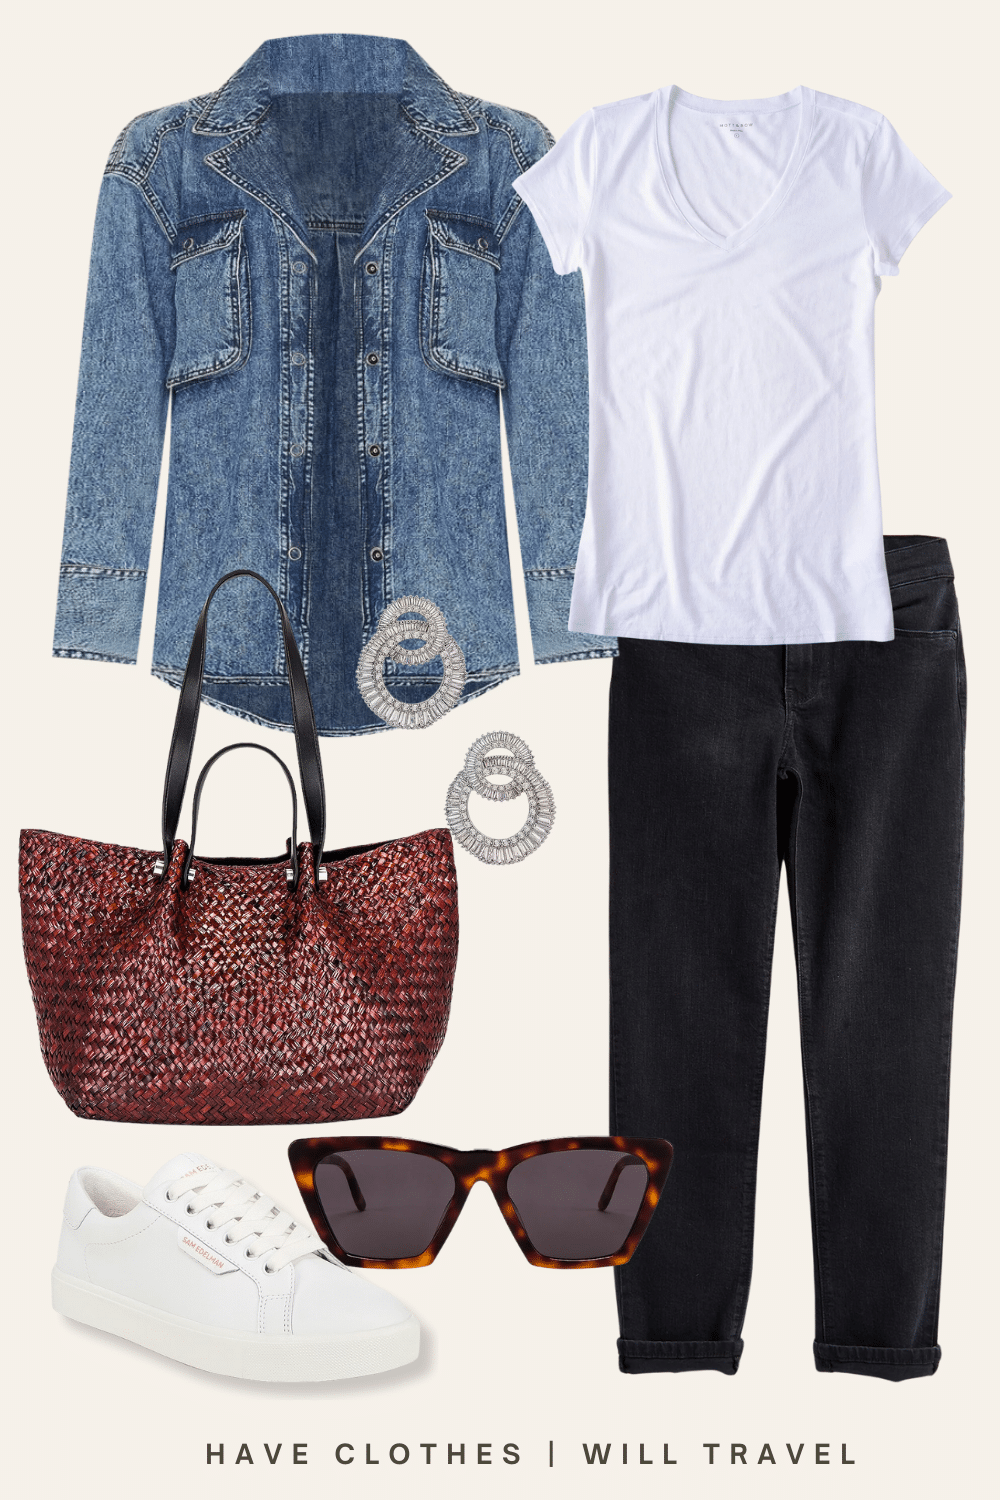 Summer Chic with Denim Shacket featuring a white t shirt and black pants